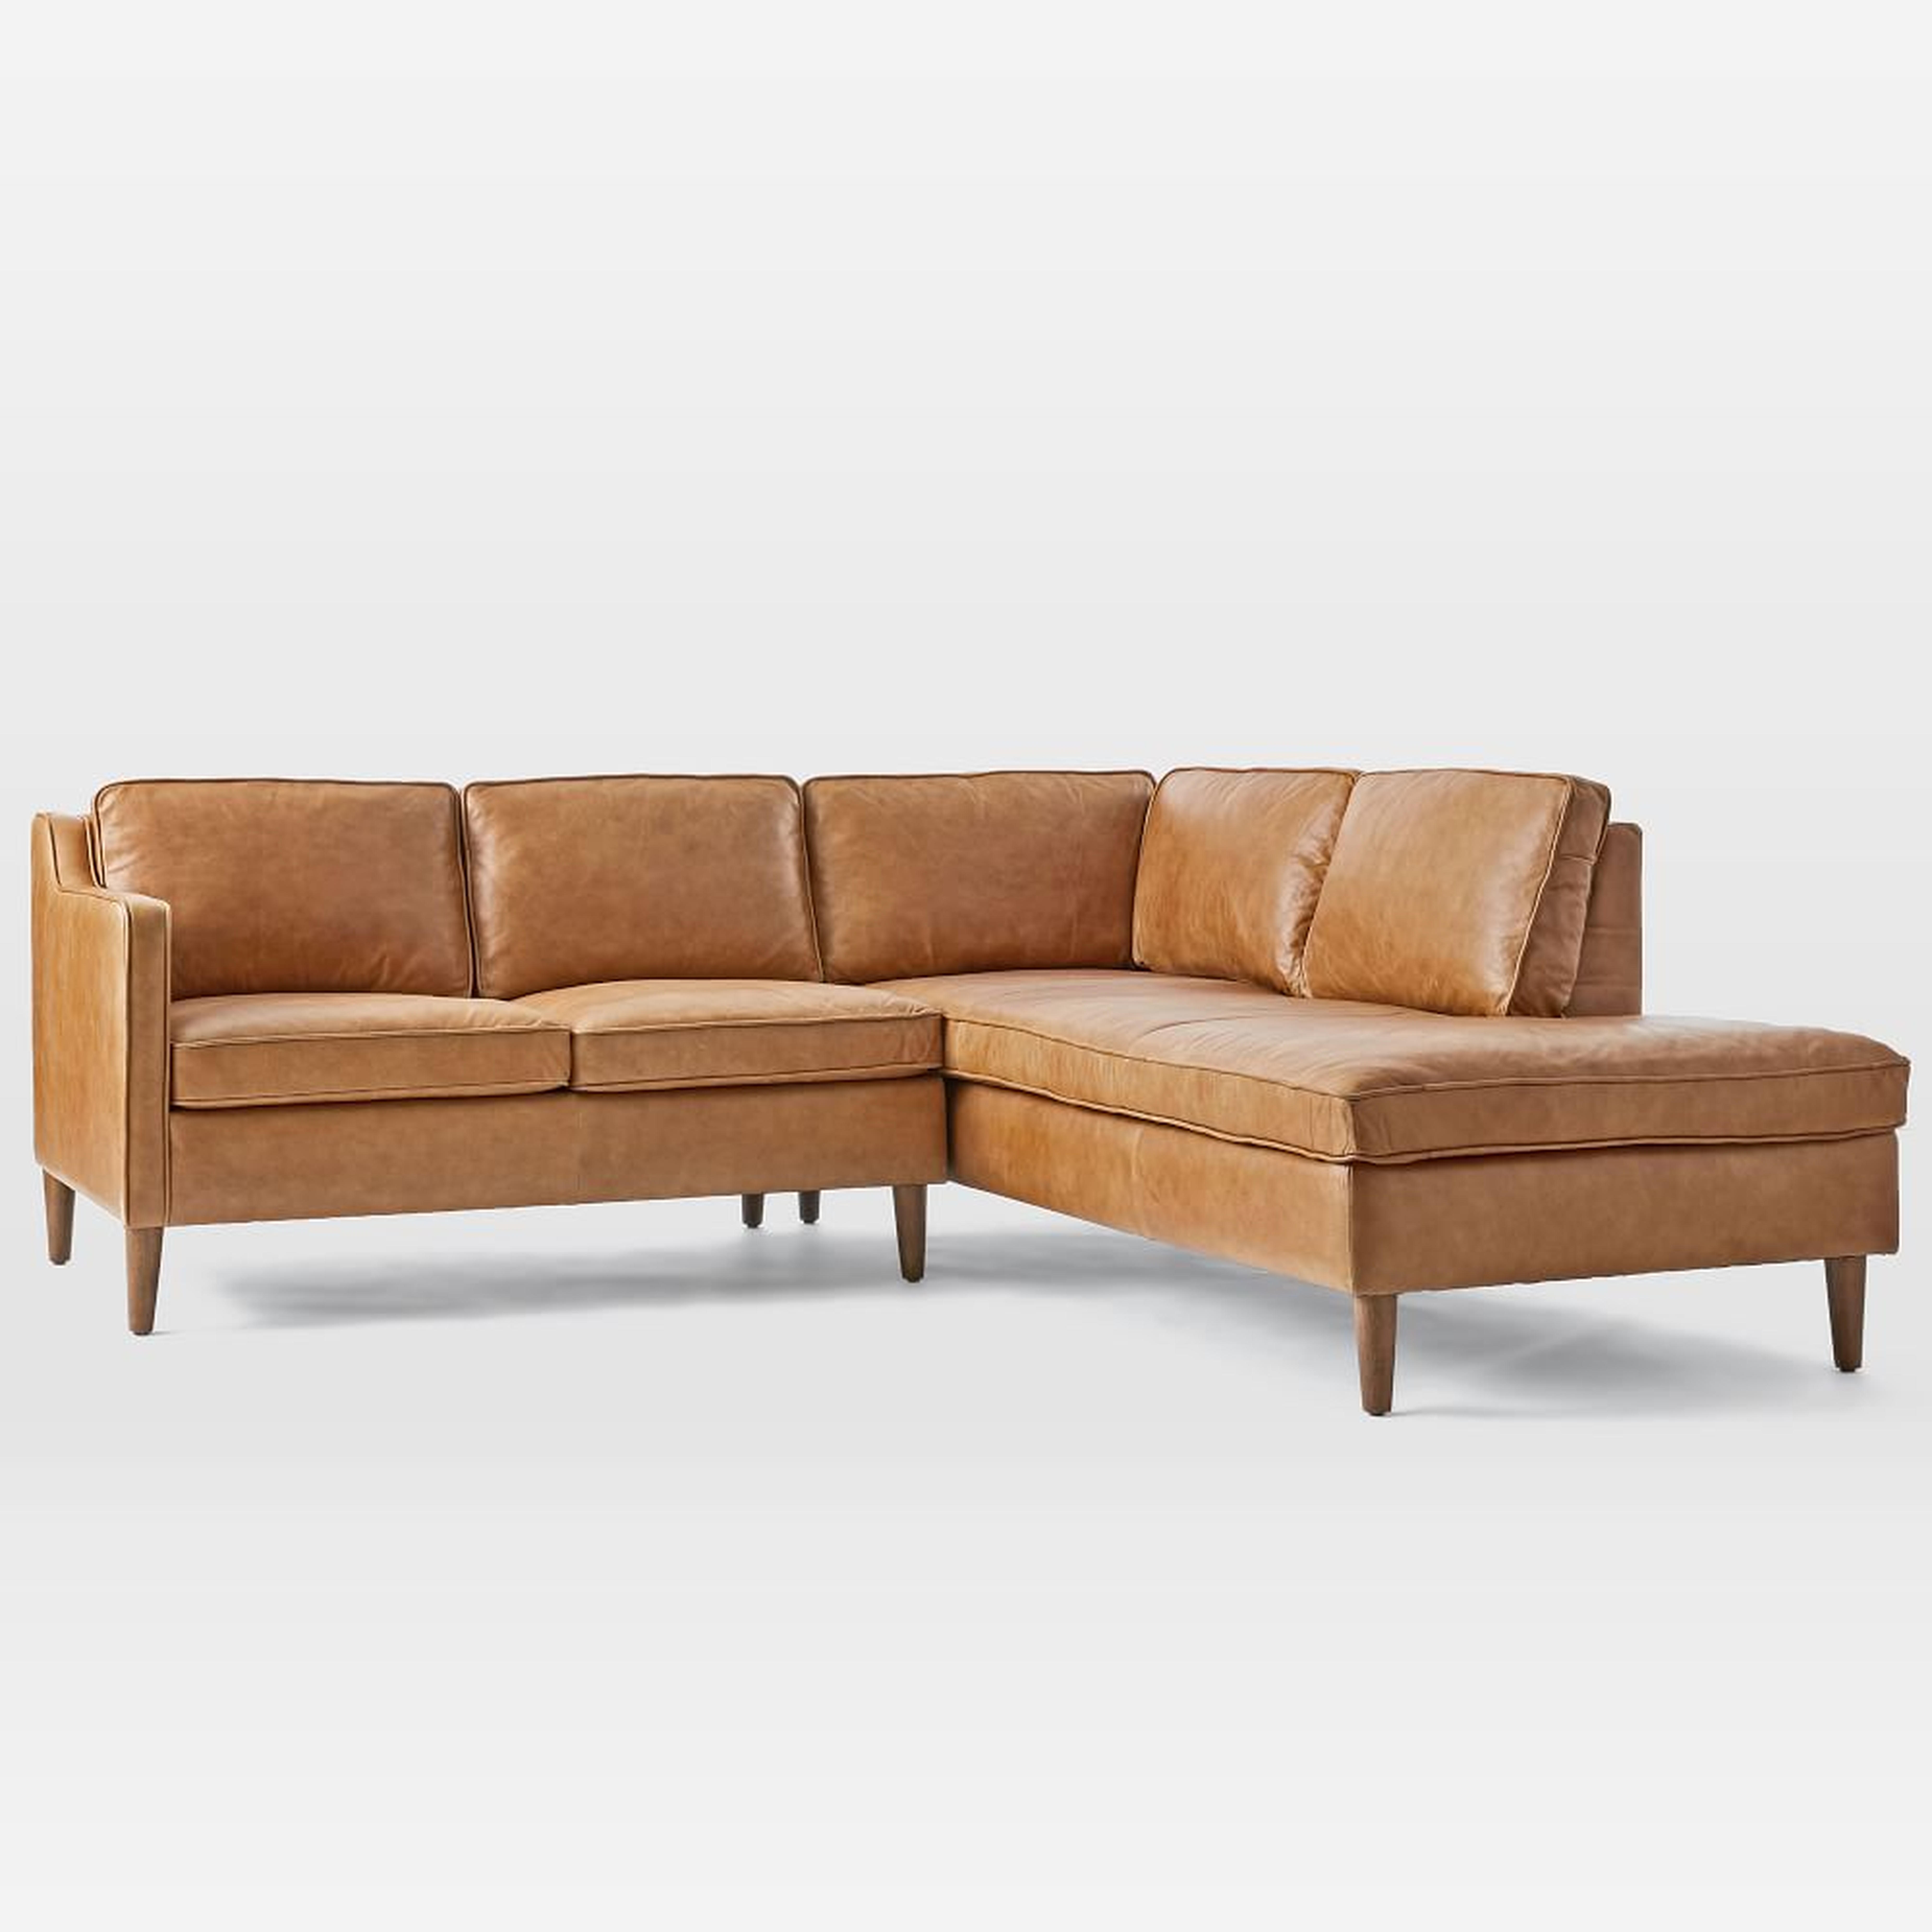 Hamilton 88" Right 2-Piece Bumper Chaise Sectional, Charme Leather, Burnt Sienna, Almond - West Elm